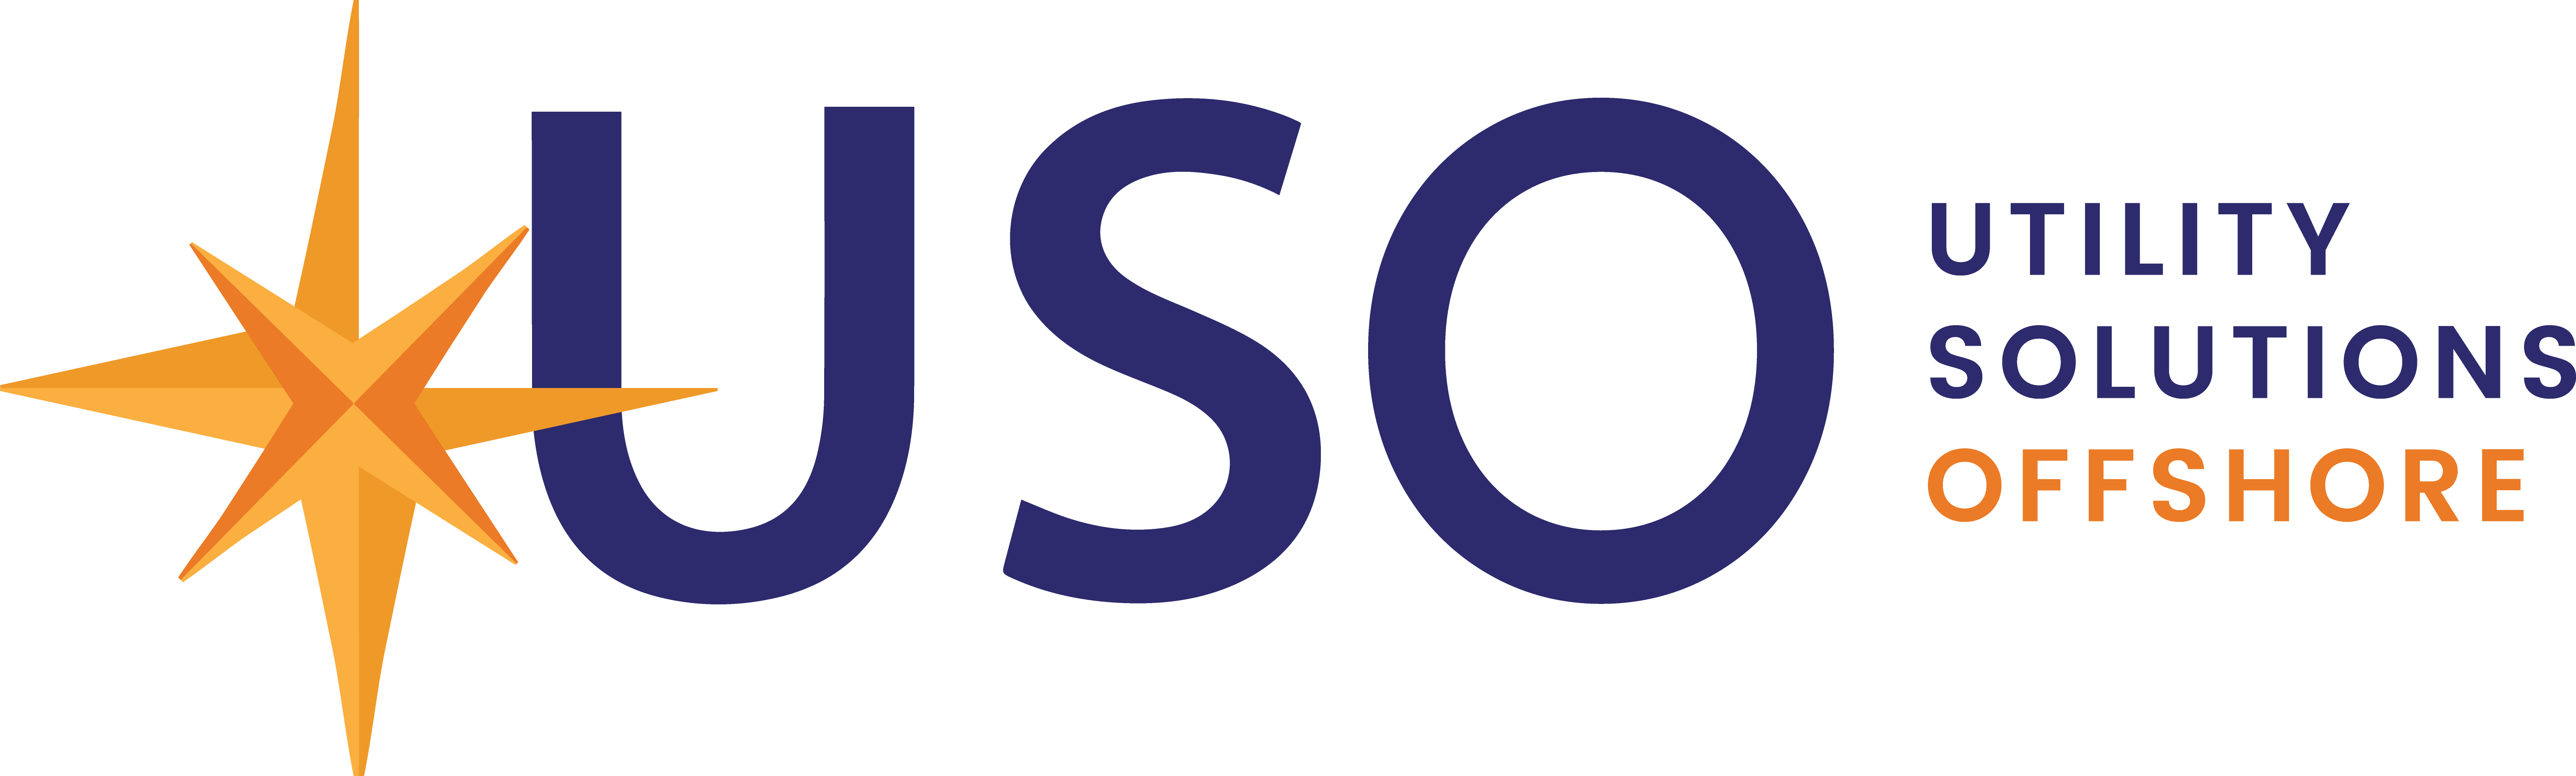 Utility Solutions Offshore (USO) logo.